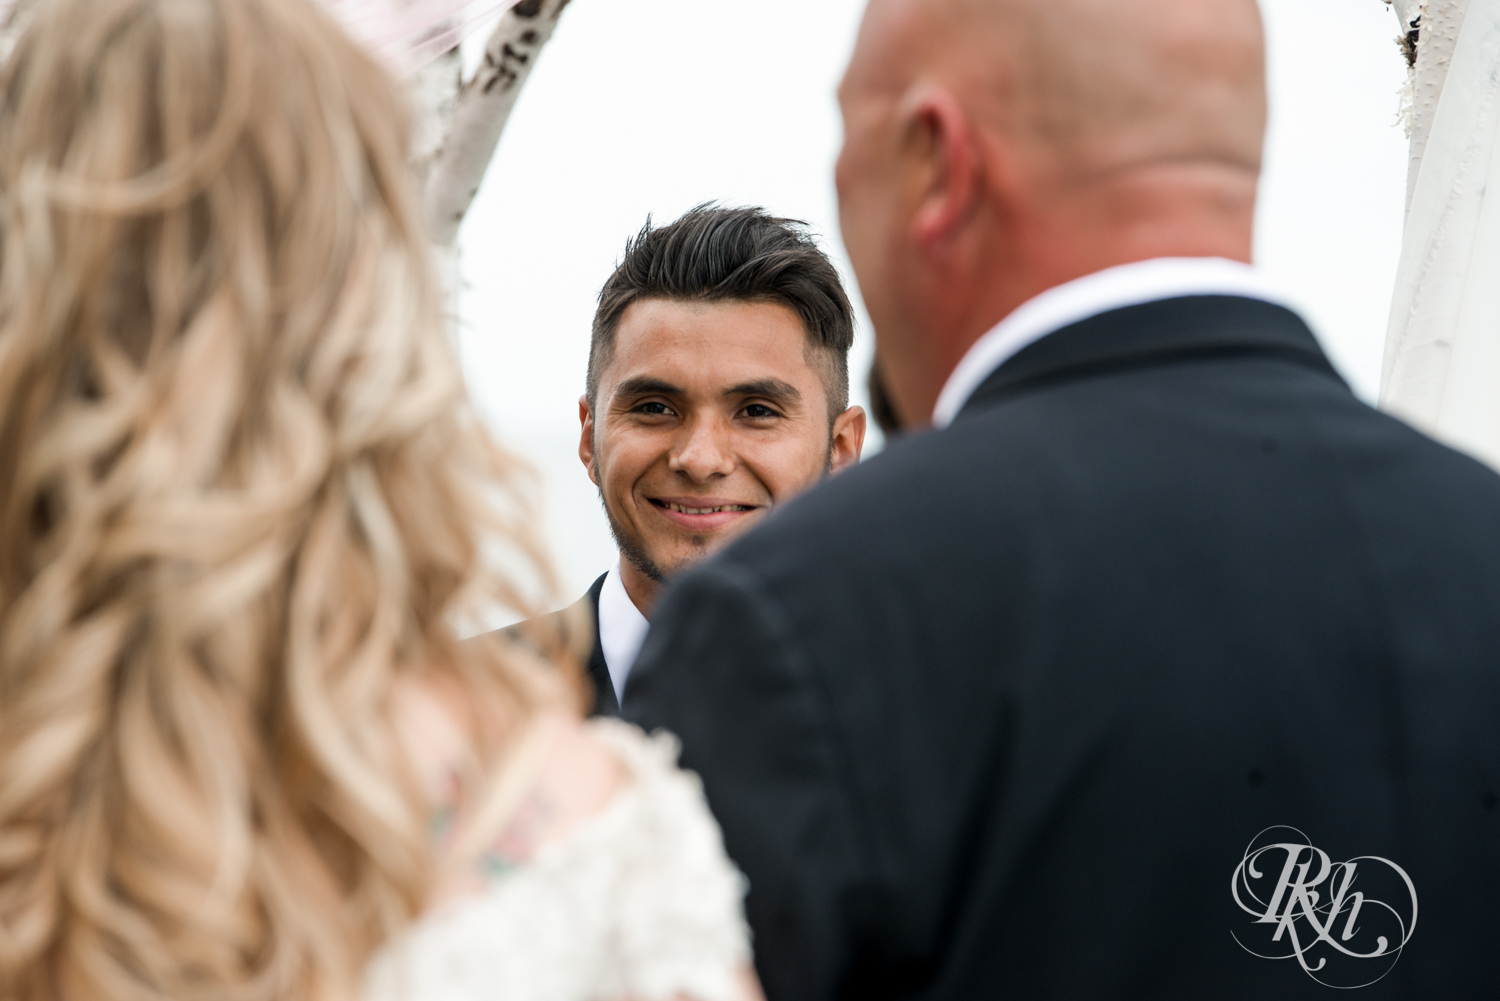 Groom sees bride walk down the aisle with dad at wedding ceremony at Izatys Resort in Onamia, Minnesota.